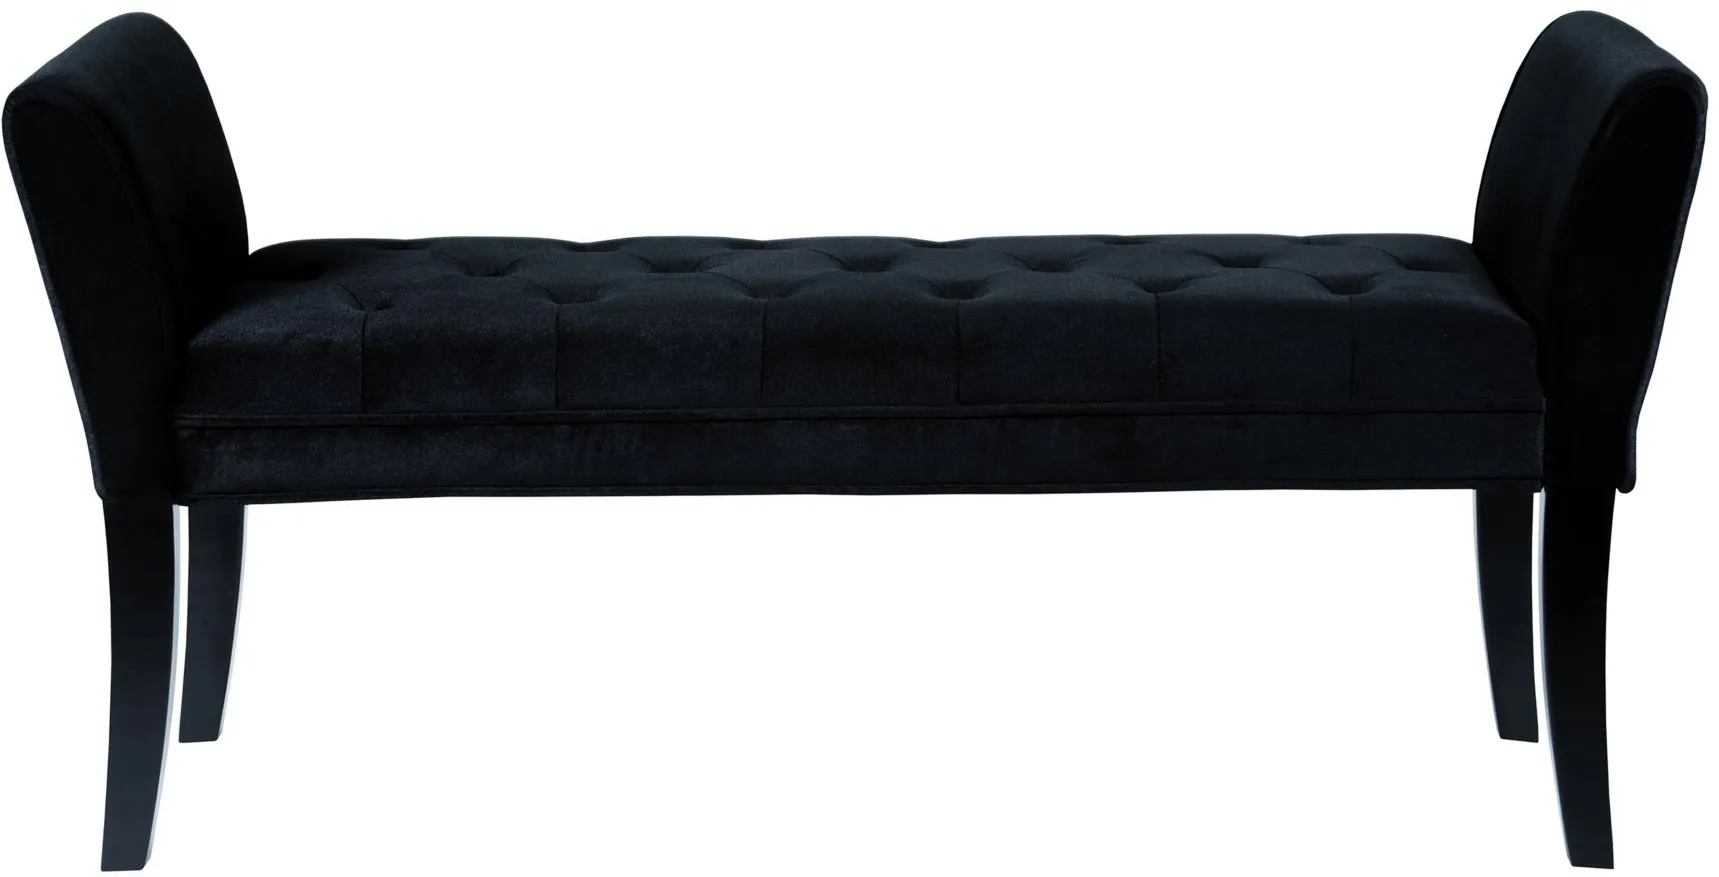 Chatham Bench in Black by Armen Living